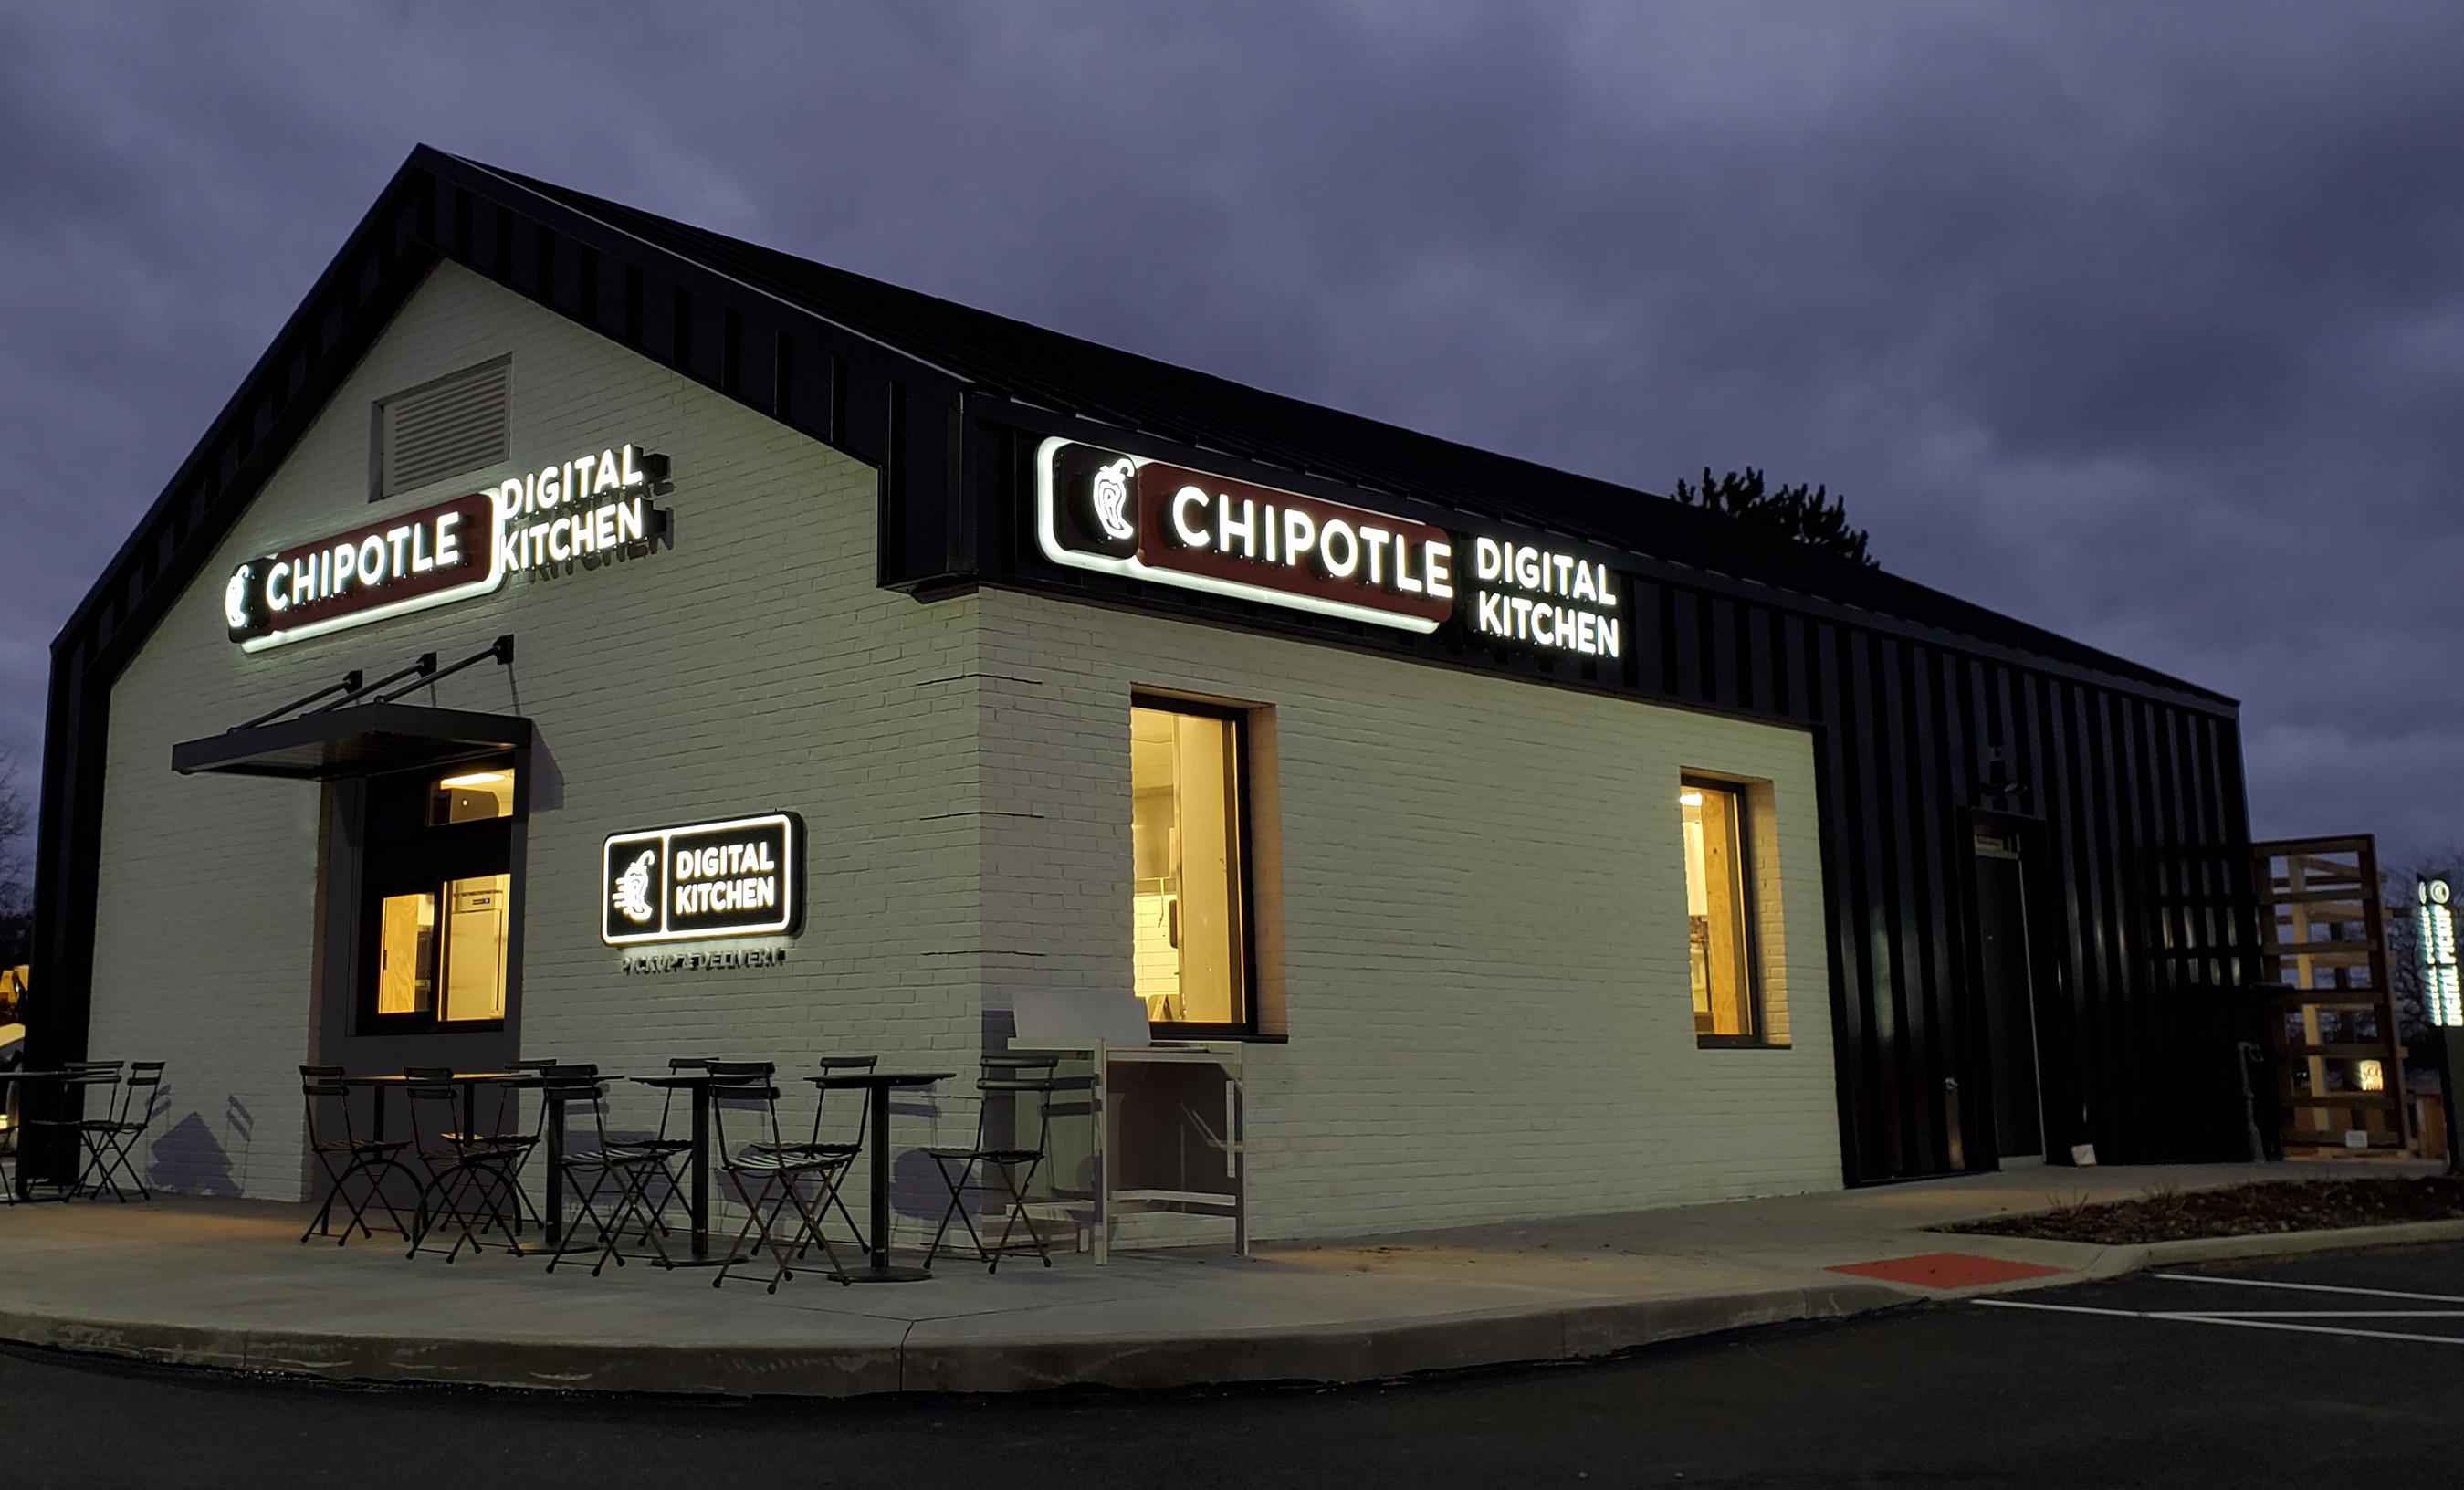 Chipotlane Digital Kitchens offers no inside guest access. The first Chipotlane Digital Kitchen in Cuyahoga Falls, Ohio includes patio seating for guests to enjoy their meals outside.